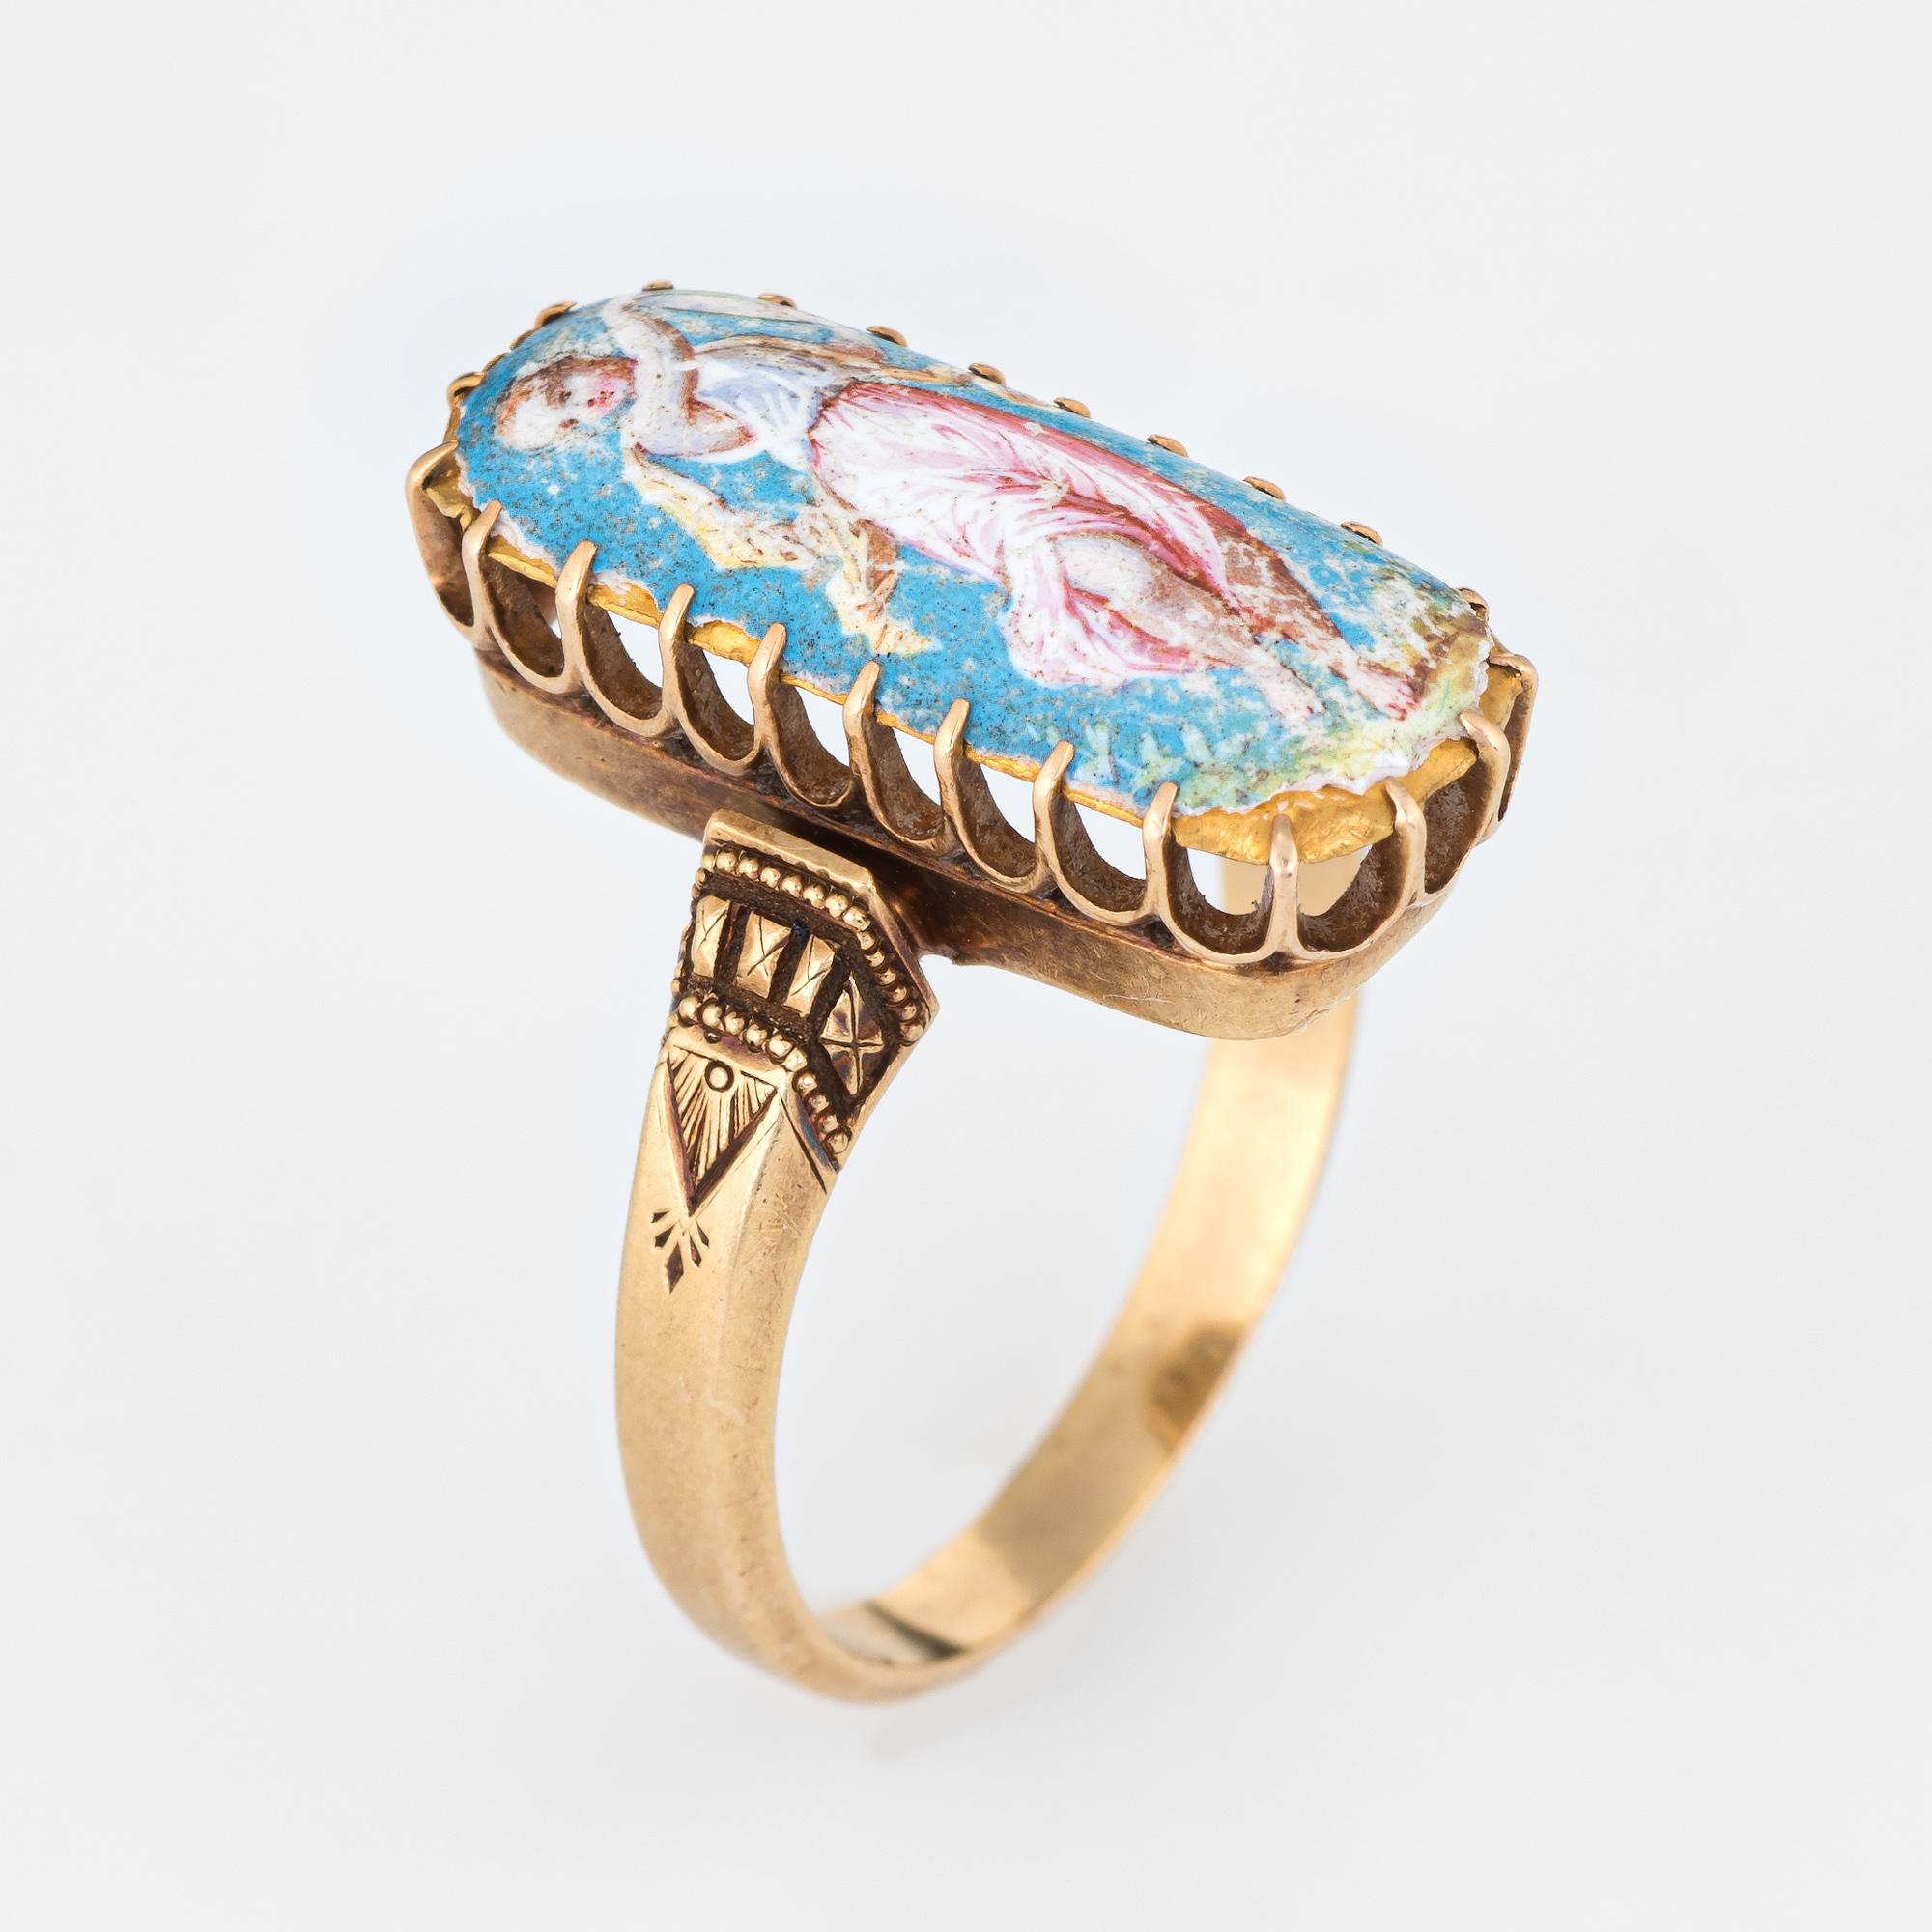 Finely detailed antique Victorian painted portrait ring (circa 1880s to 1900s), crafted in 18 karat yellow gold. 

The ring is set with a rectangular plaque hand painted with the image of the Greek Muse of Music, Terpsichore. She is typically